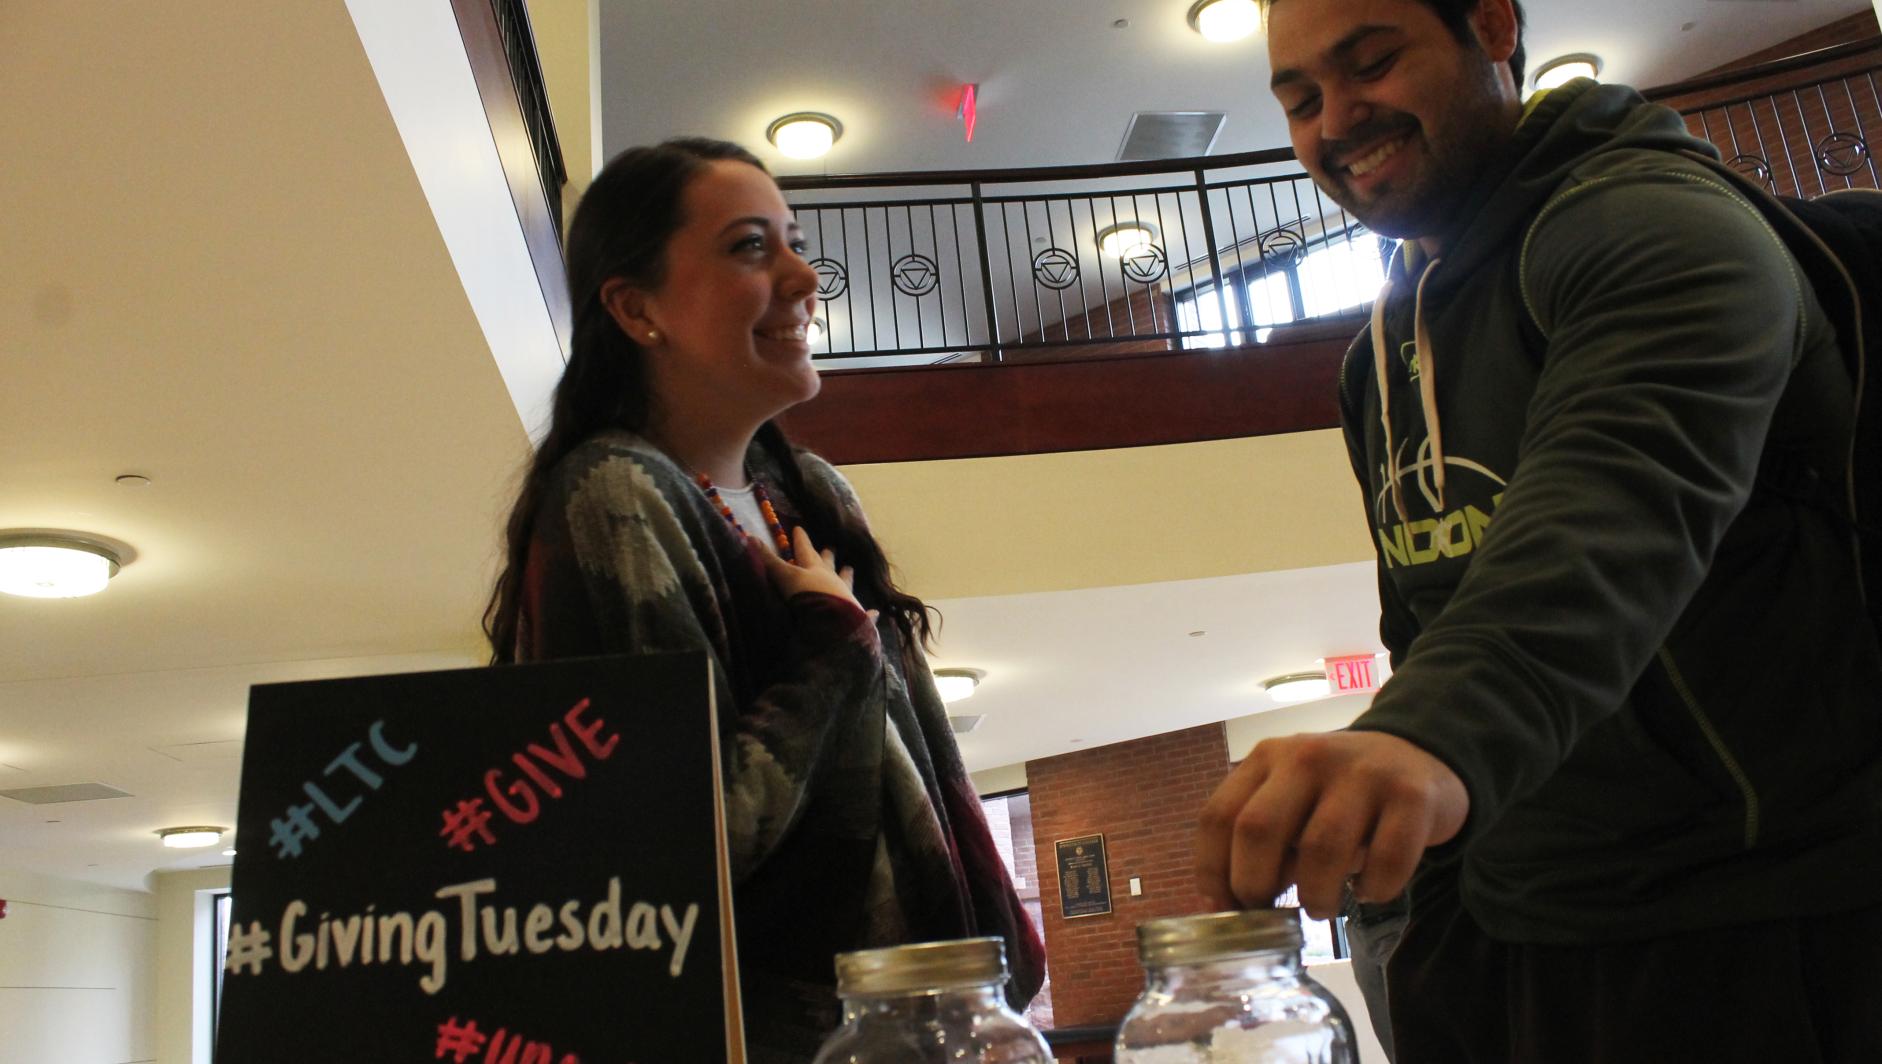 Springfield College students give back as part of #GivingTuesday 